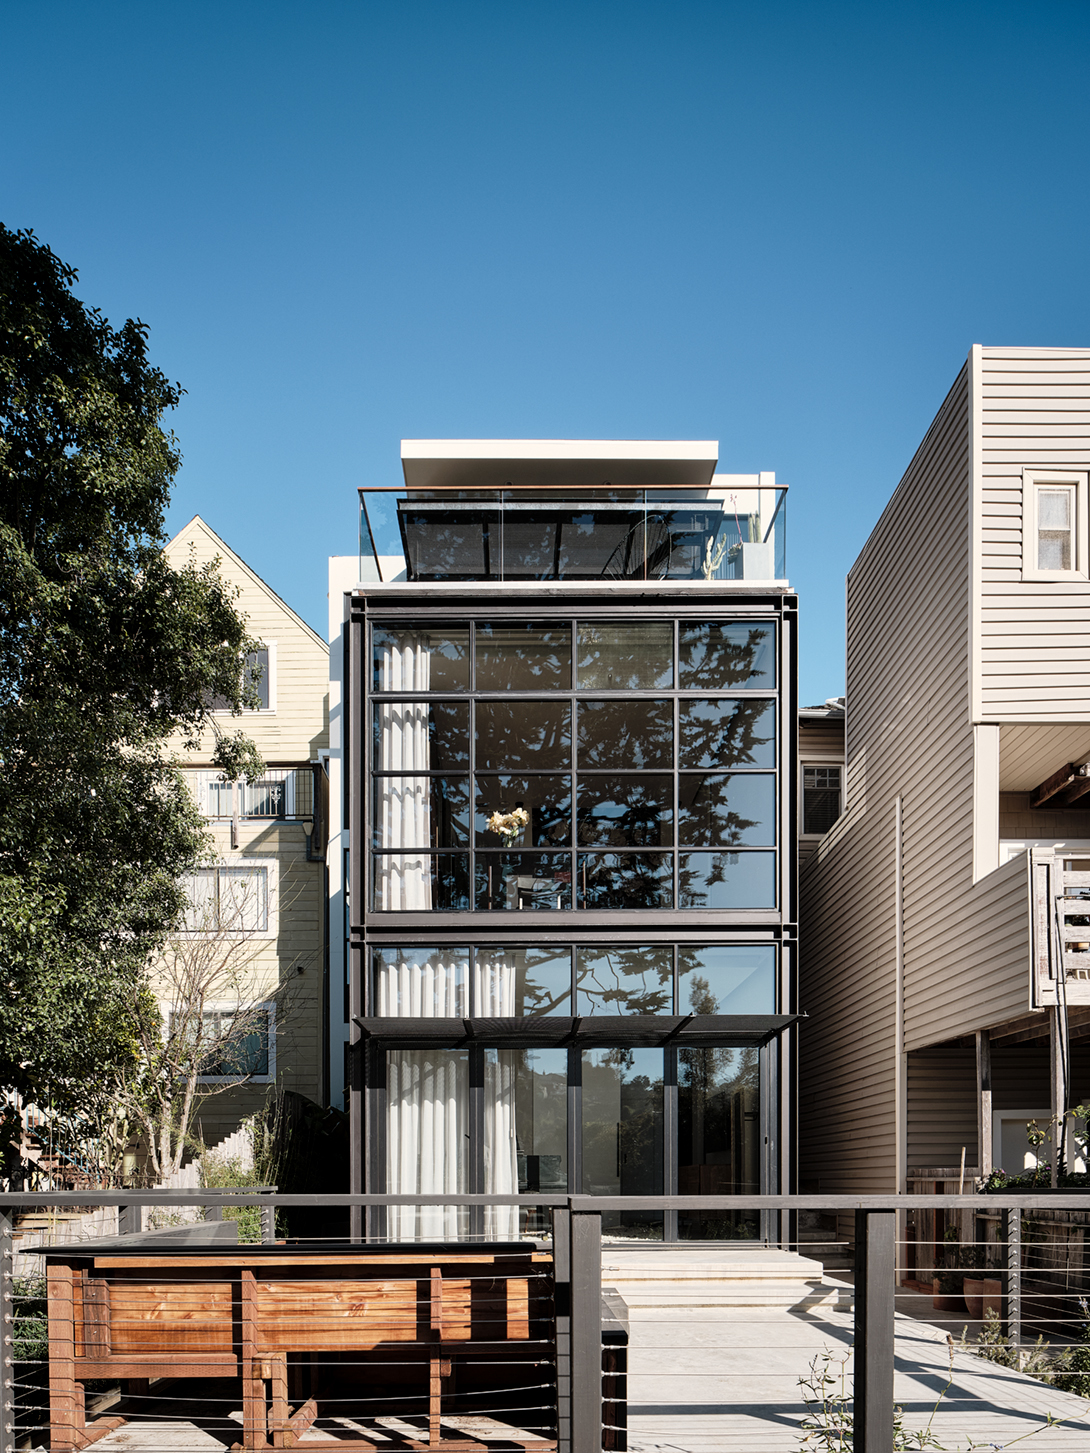 The glass-and-steel rear facade is like an aperture for the house